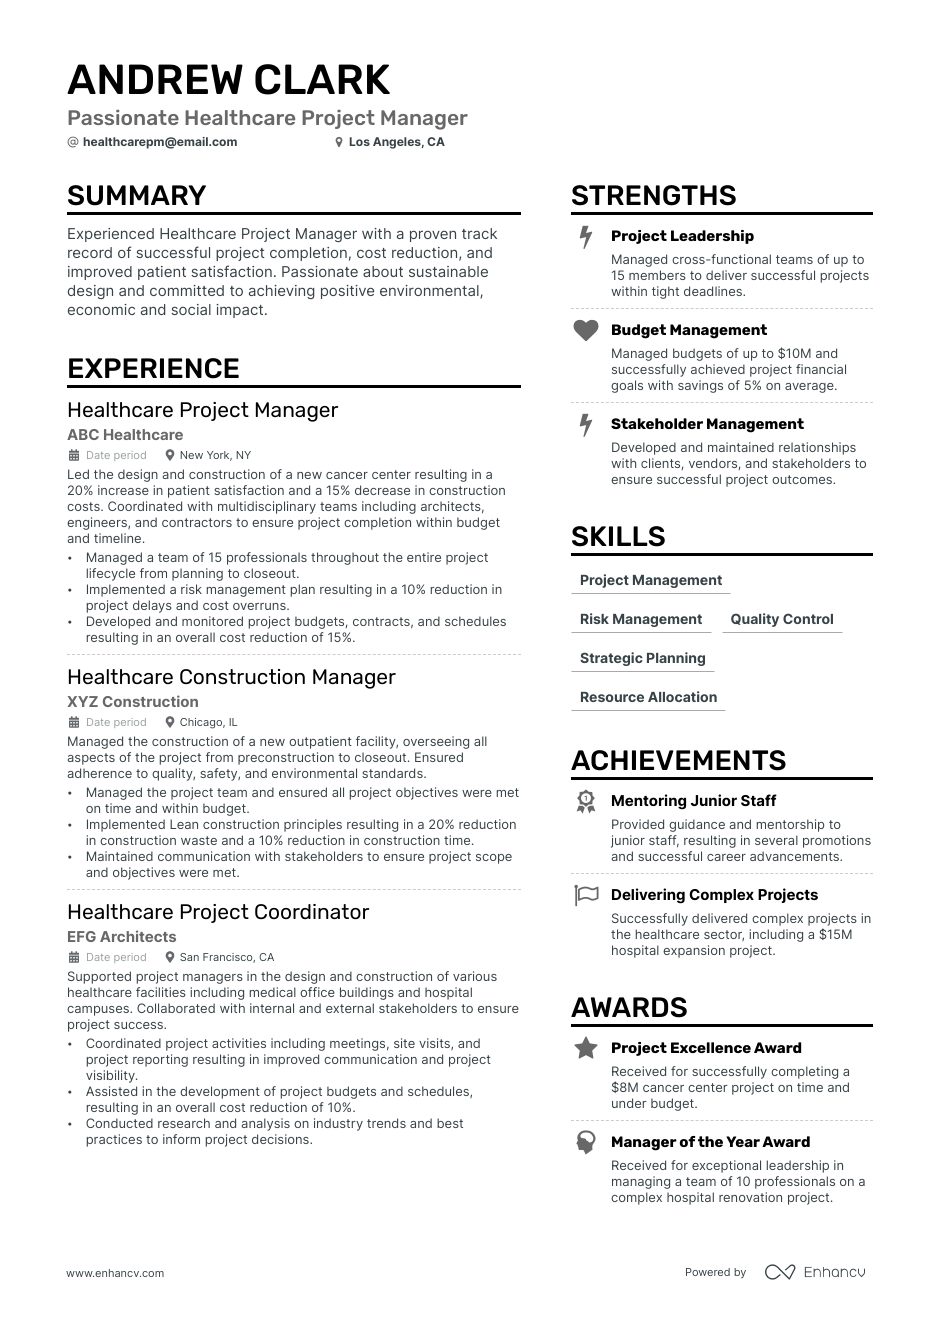 Healthcare Project Manager resume example